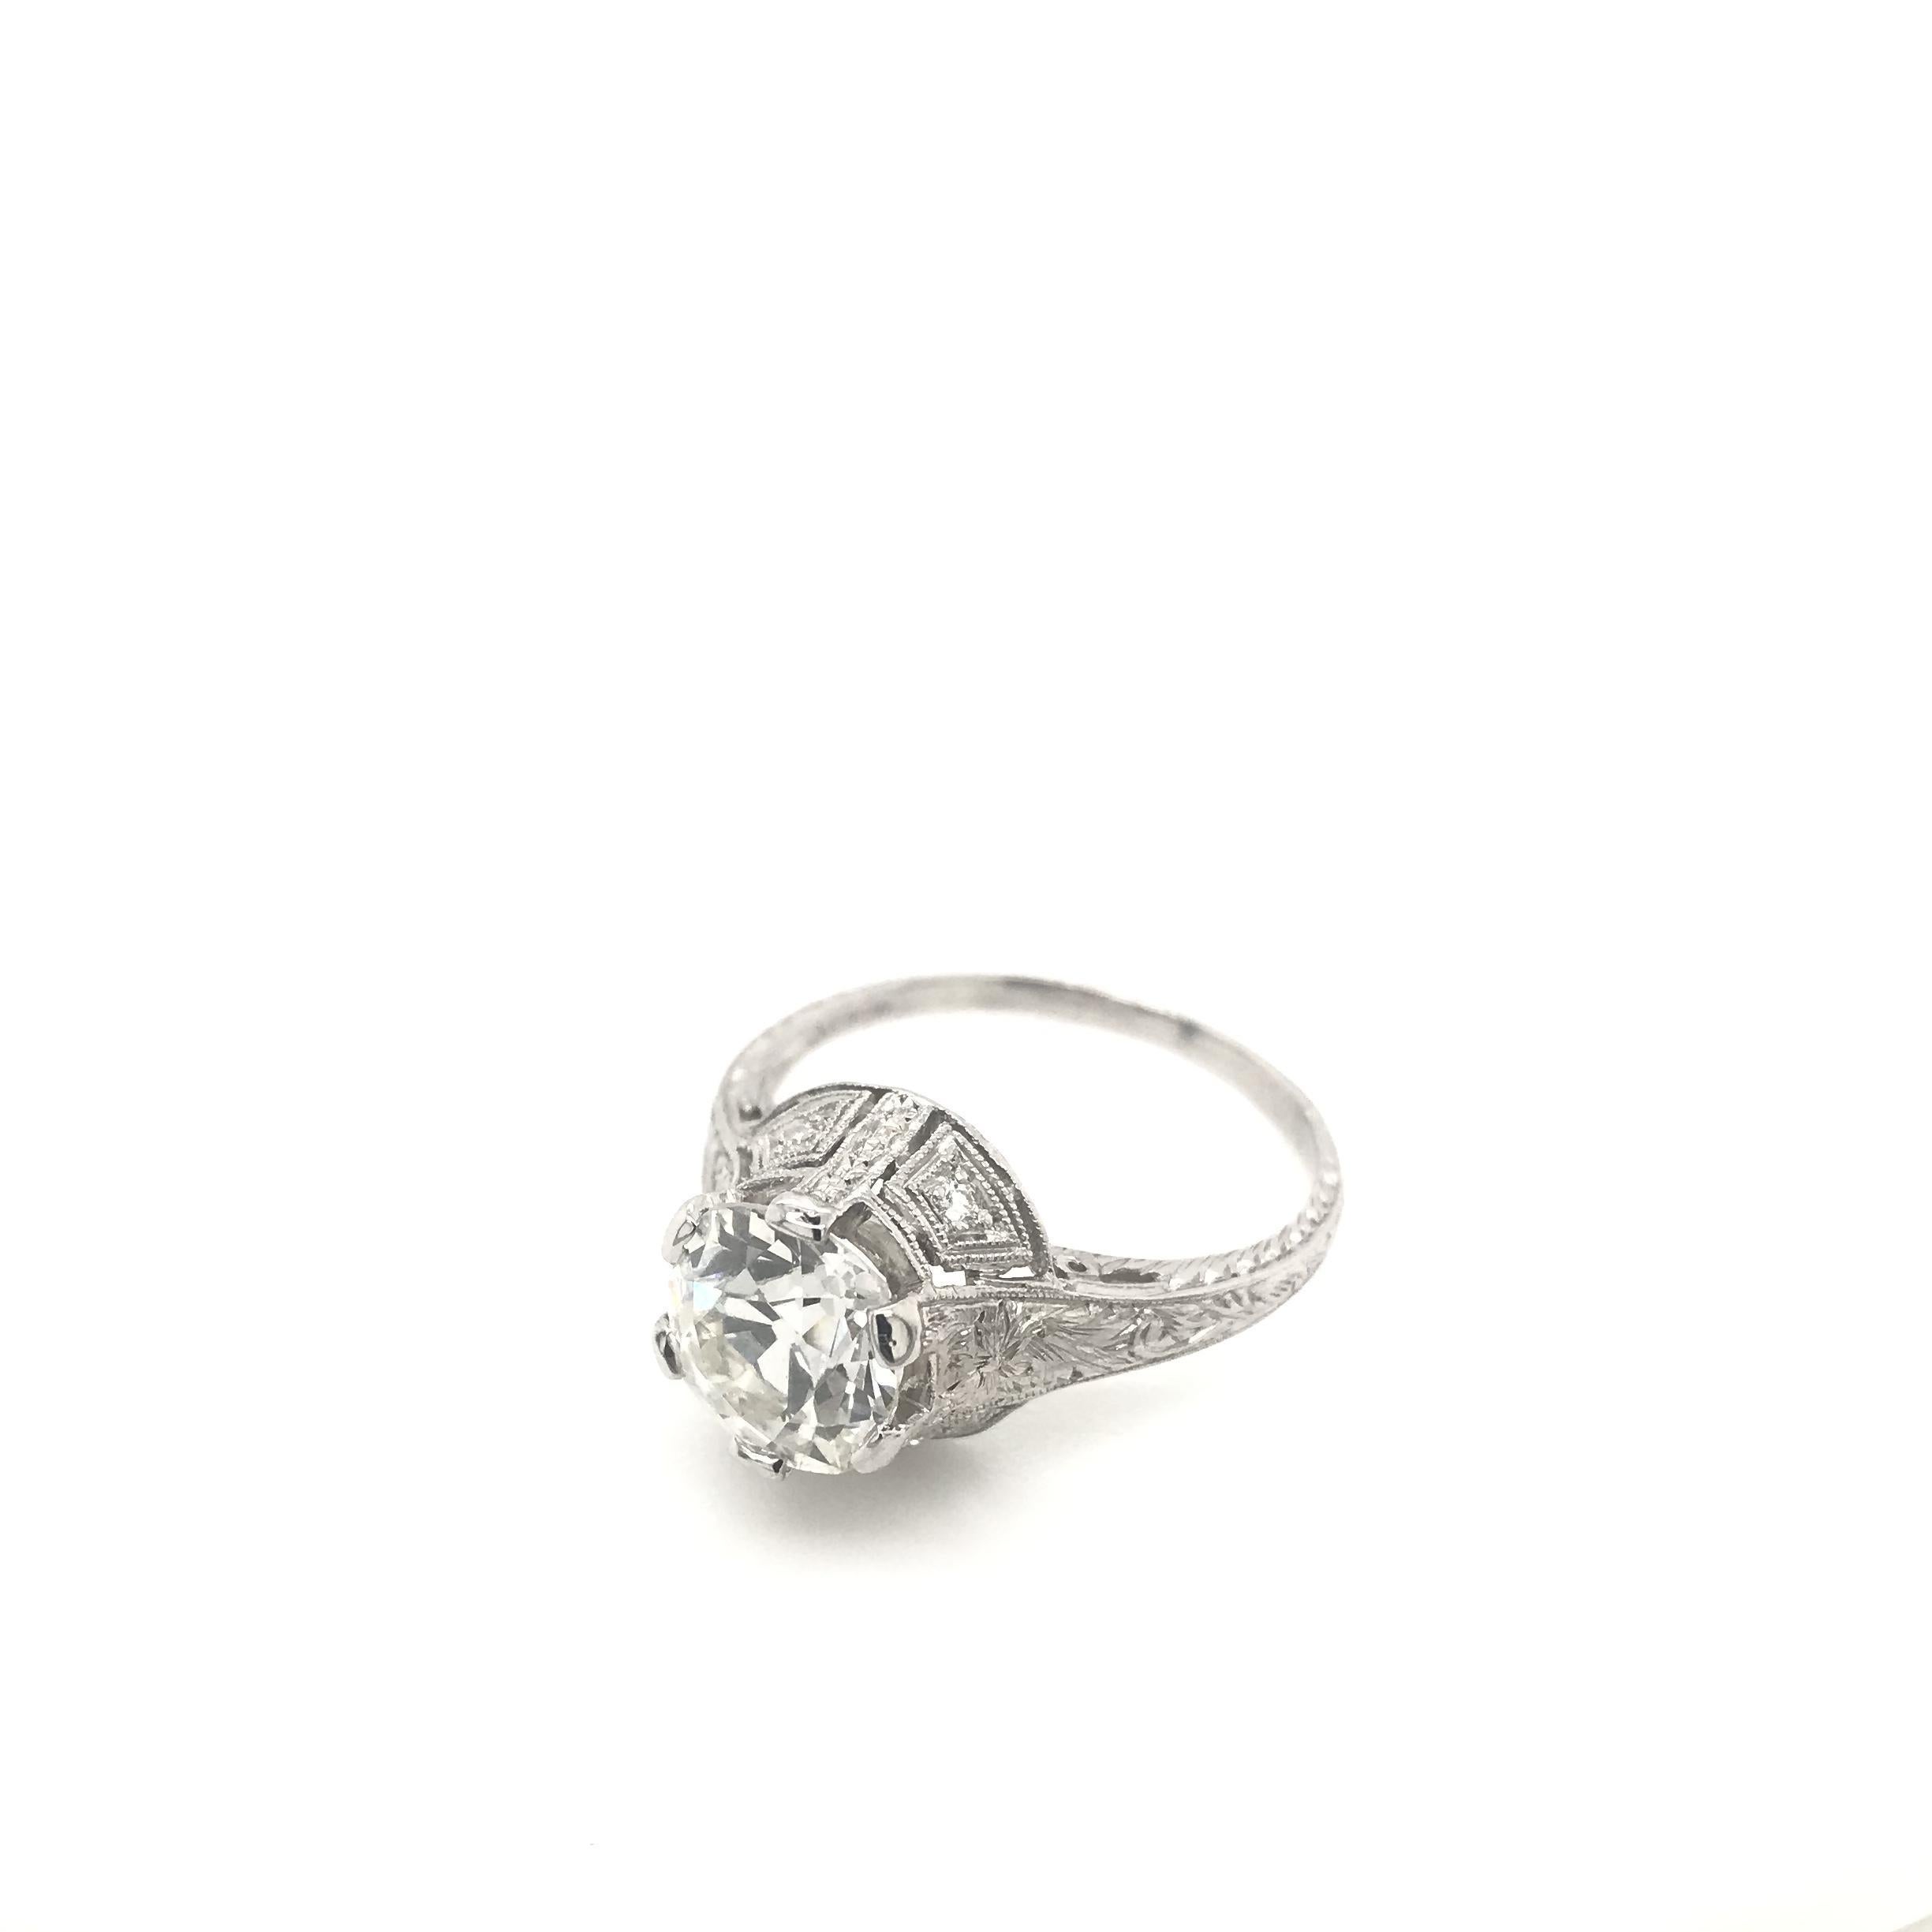 Antique Edwardian 2.07 Carat Old Mine Cut Diamond Ring In Excellent Condition For Sale In Montgomery, AL